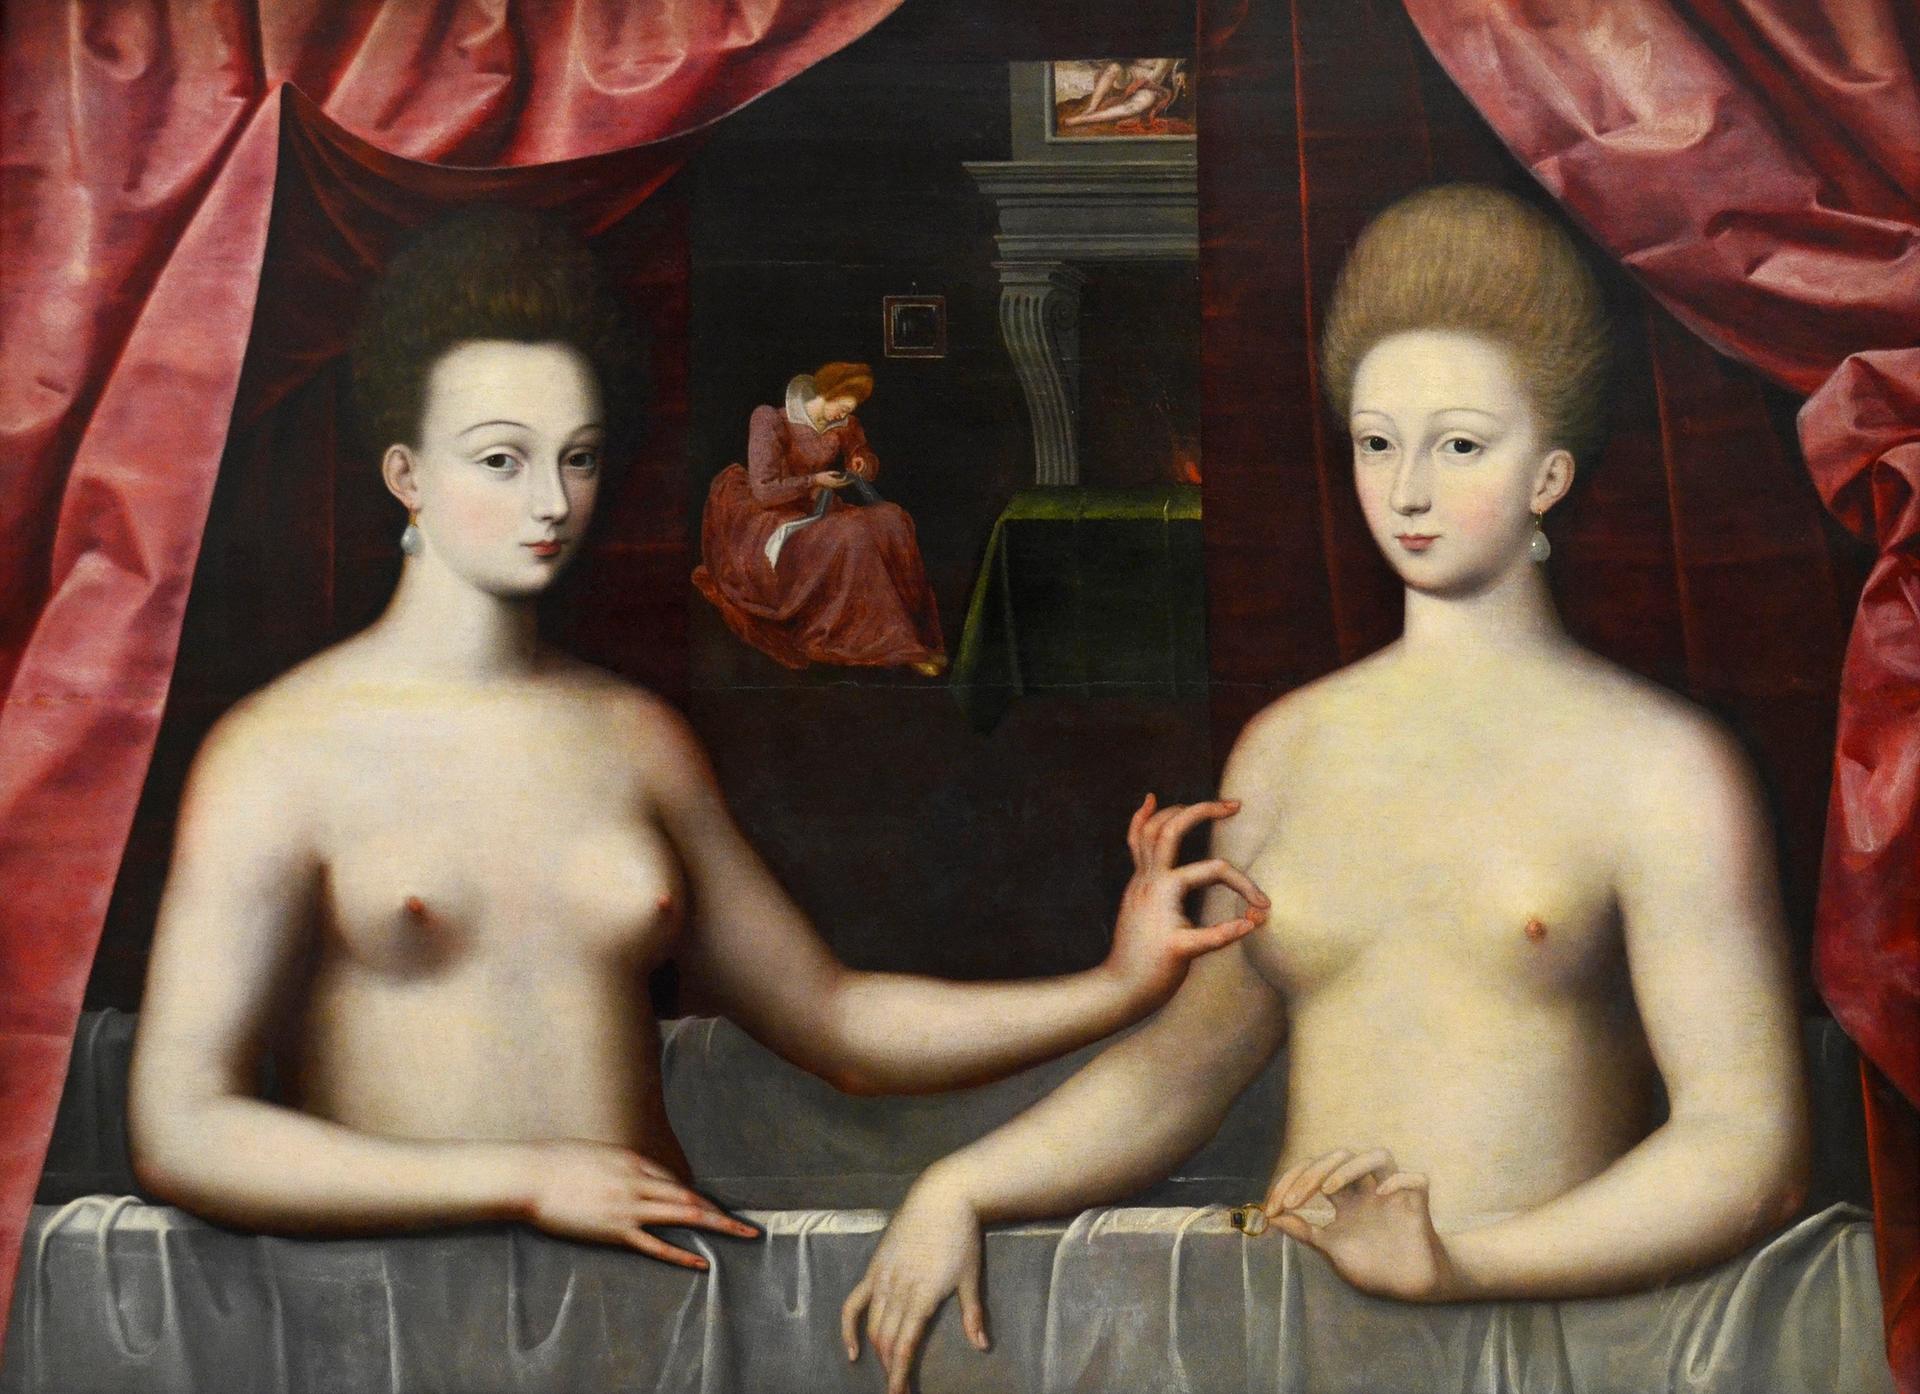 Too titillating? Pomarède Vincent's Gabrielle d'Estrées and One of Her Sisters, which hangs in the Louvre, would fall afoul of Iowa's nude ban Paris, Musée du Louvre © RMN